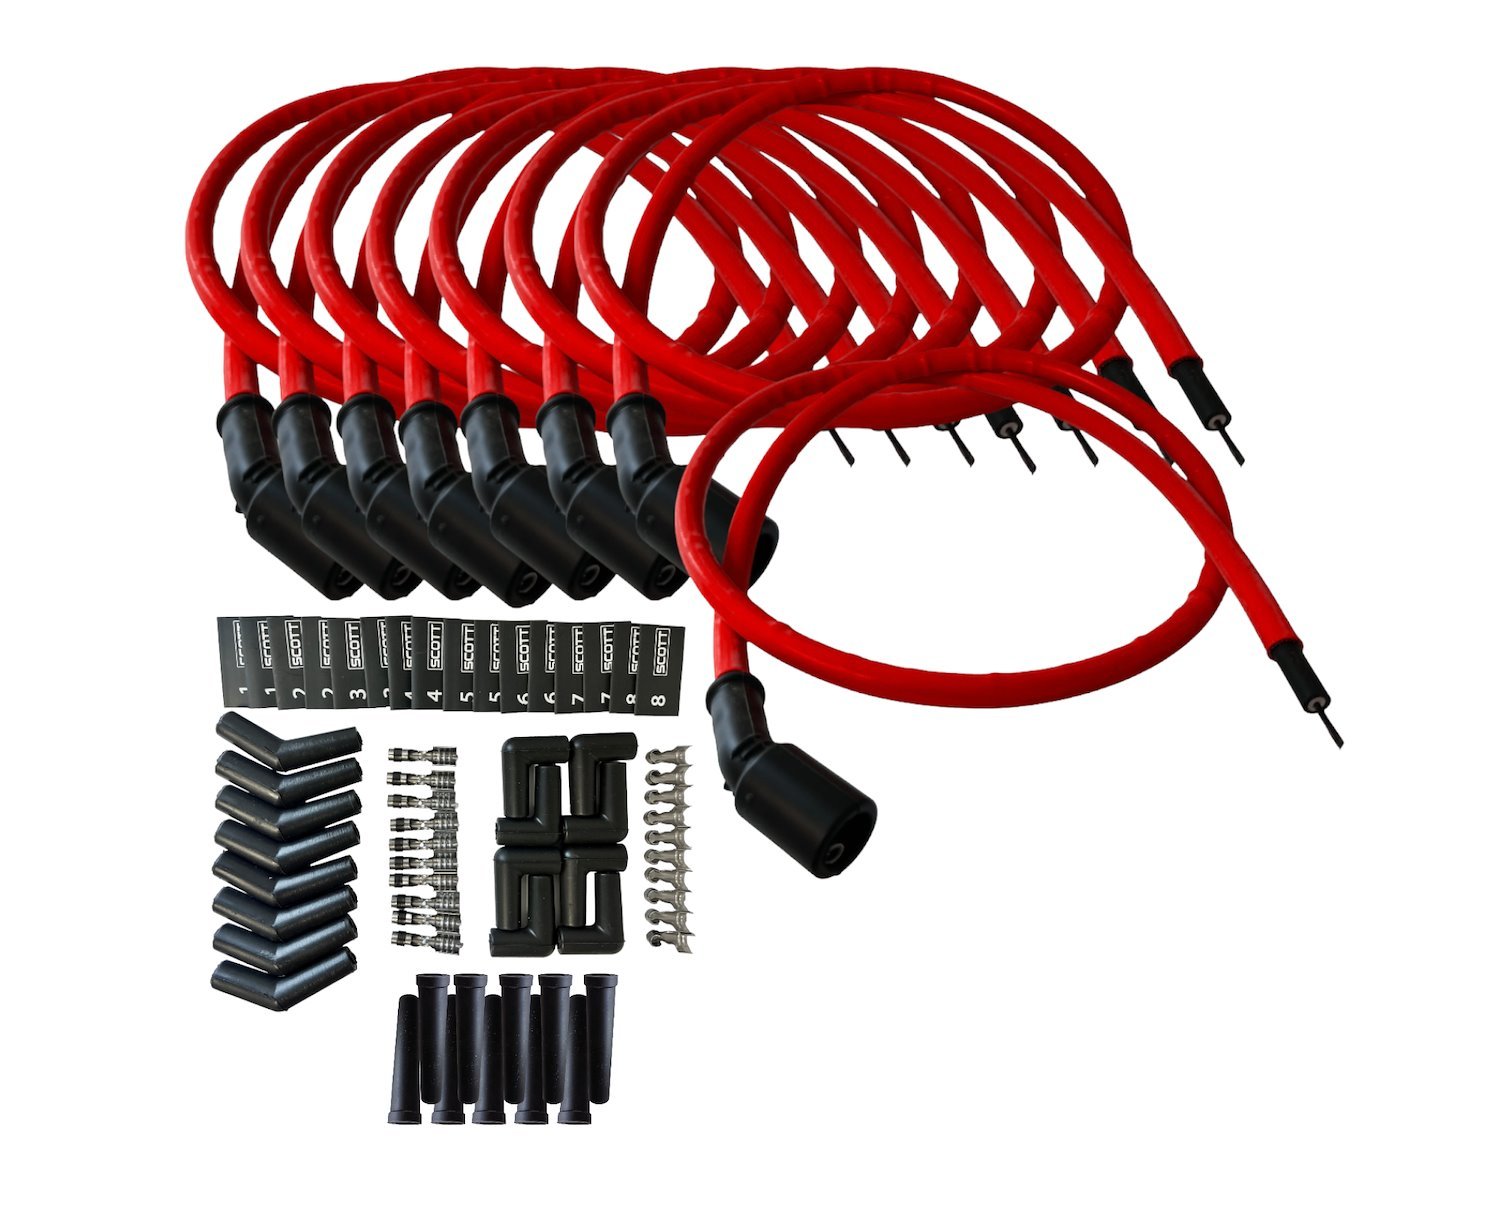 SPW-CH-LSRELO-2 DIY High-Performance Silicone-Sleeved Spark Plug Wire Set, GM LS [Red]